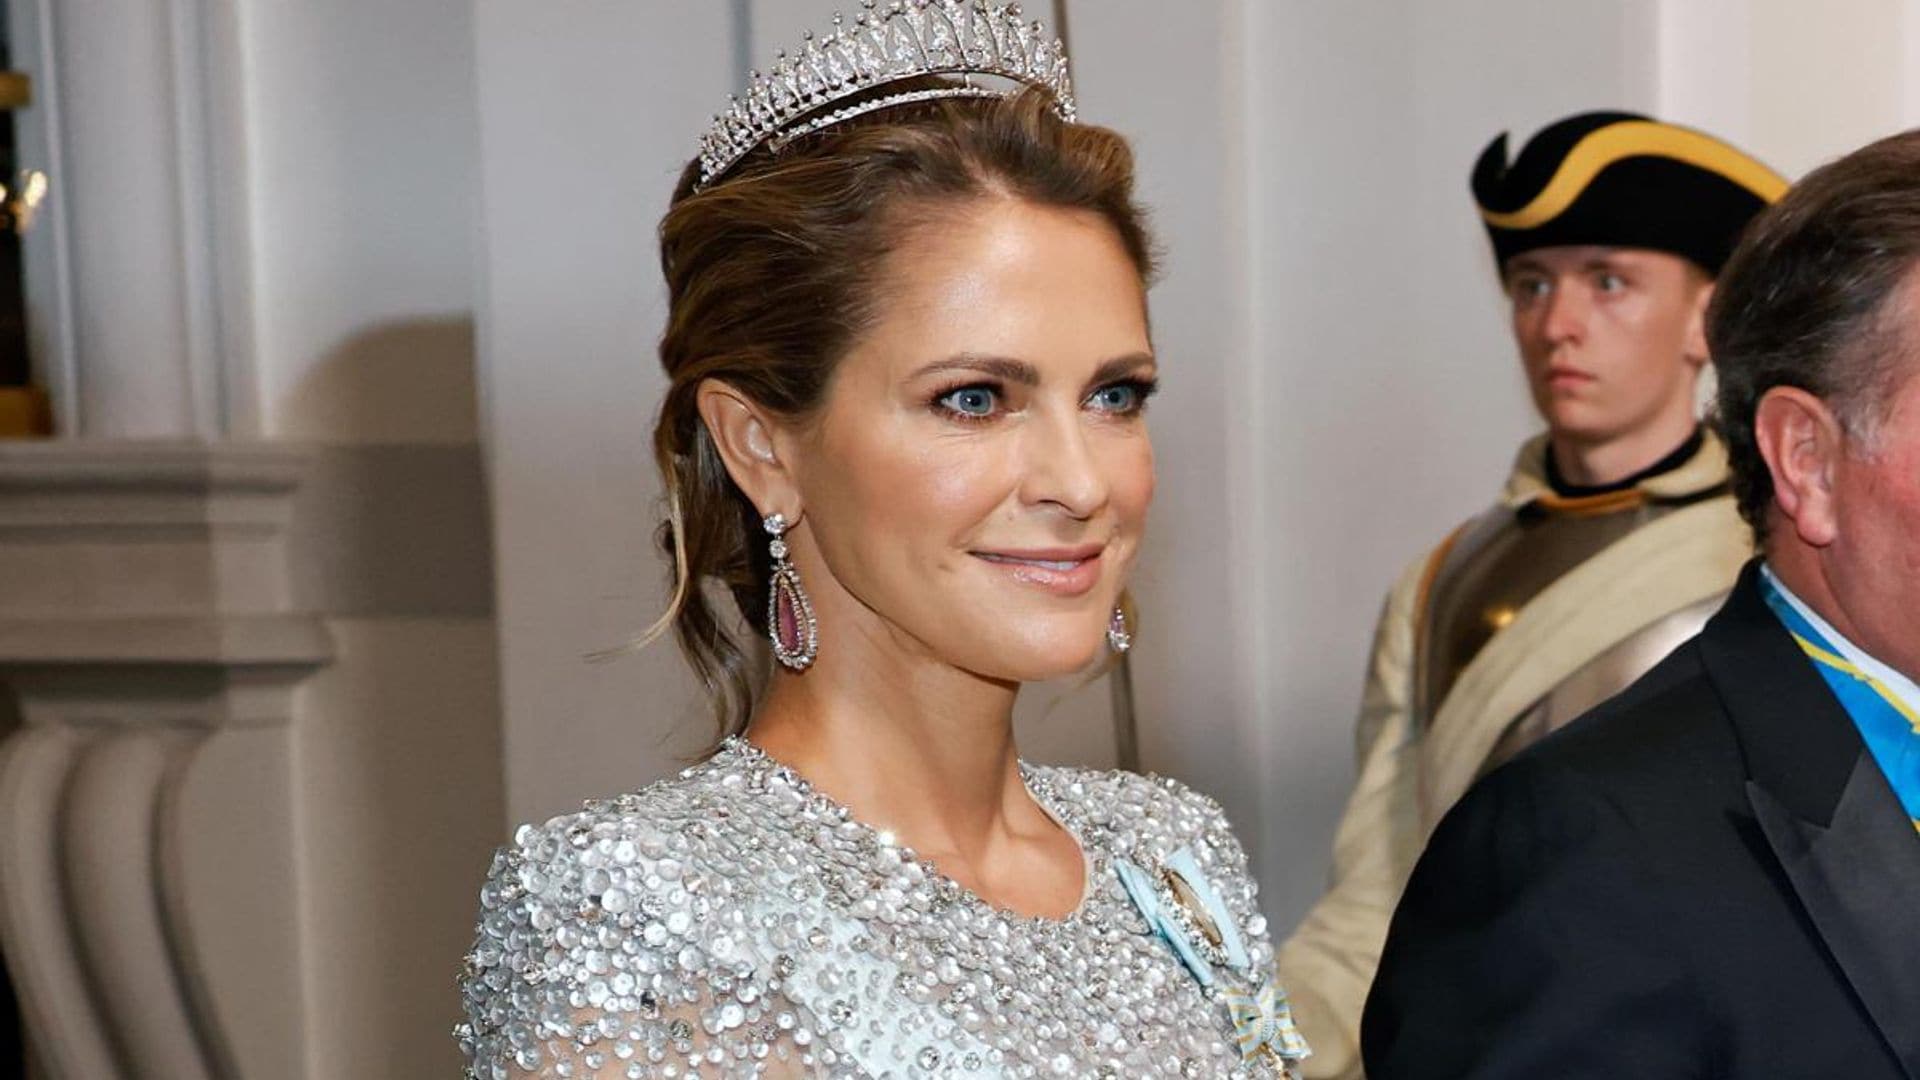 Princess Madeleine’s daughter Adrienne, 5, dresses up as beloved princess for Halloween